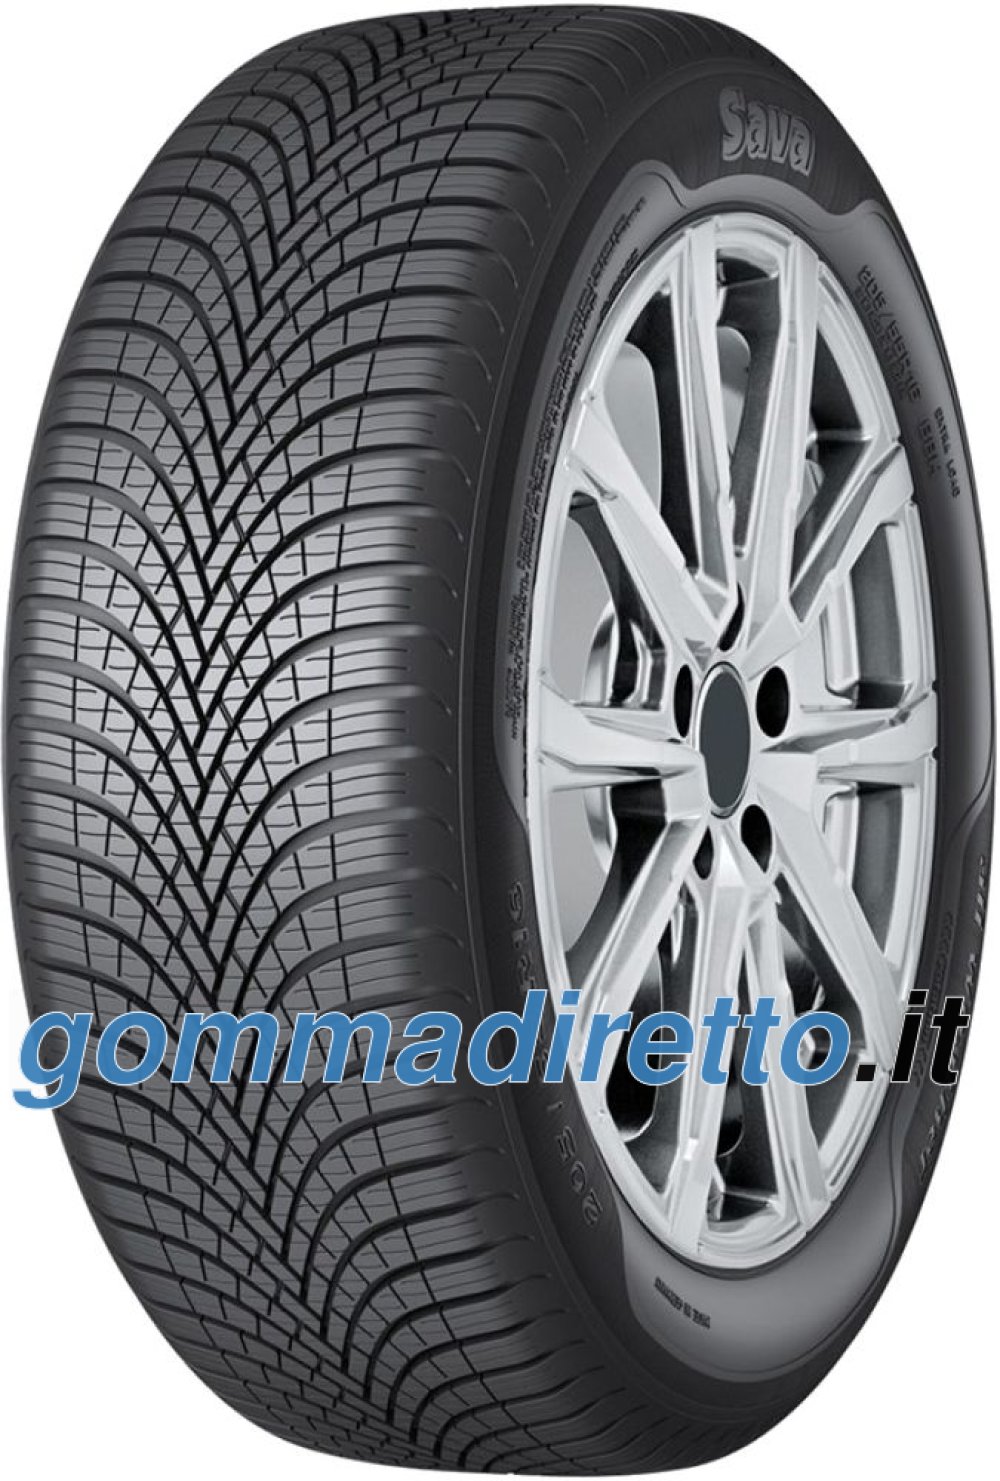 Image of Sava All Weather ( 215/60 R16 99V XL )